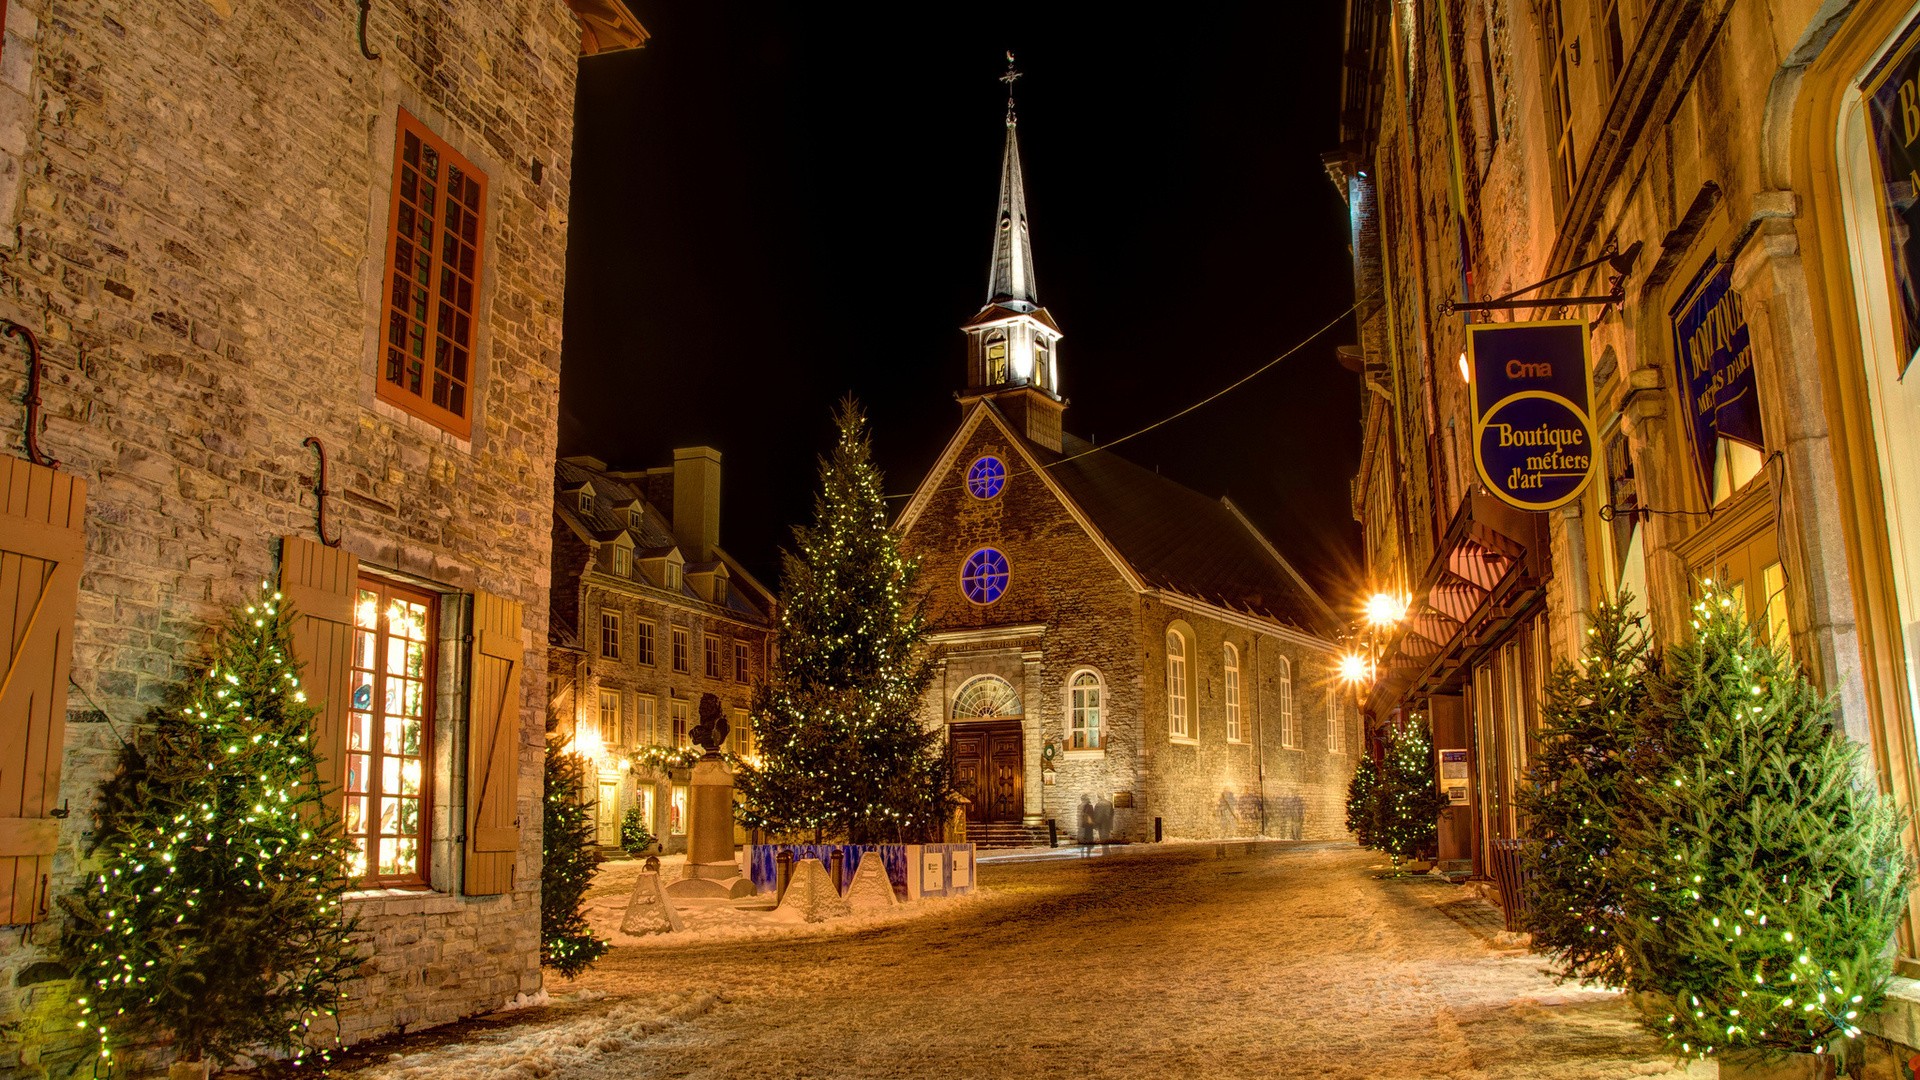 #house, #city, #lights, #snow, #Christianity, #Quebec, #night, #history, #trees, #street, #Christmas, #window, #Canada, #long exposure, #building, #architecture, #old building, #church, #tower, #town, #winter, # Christmas Tree, #christmas lights